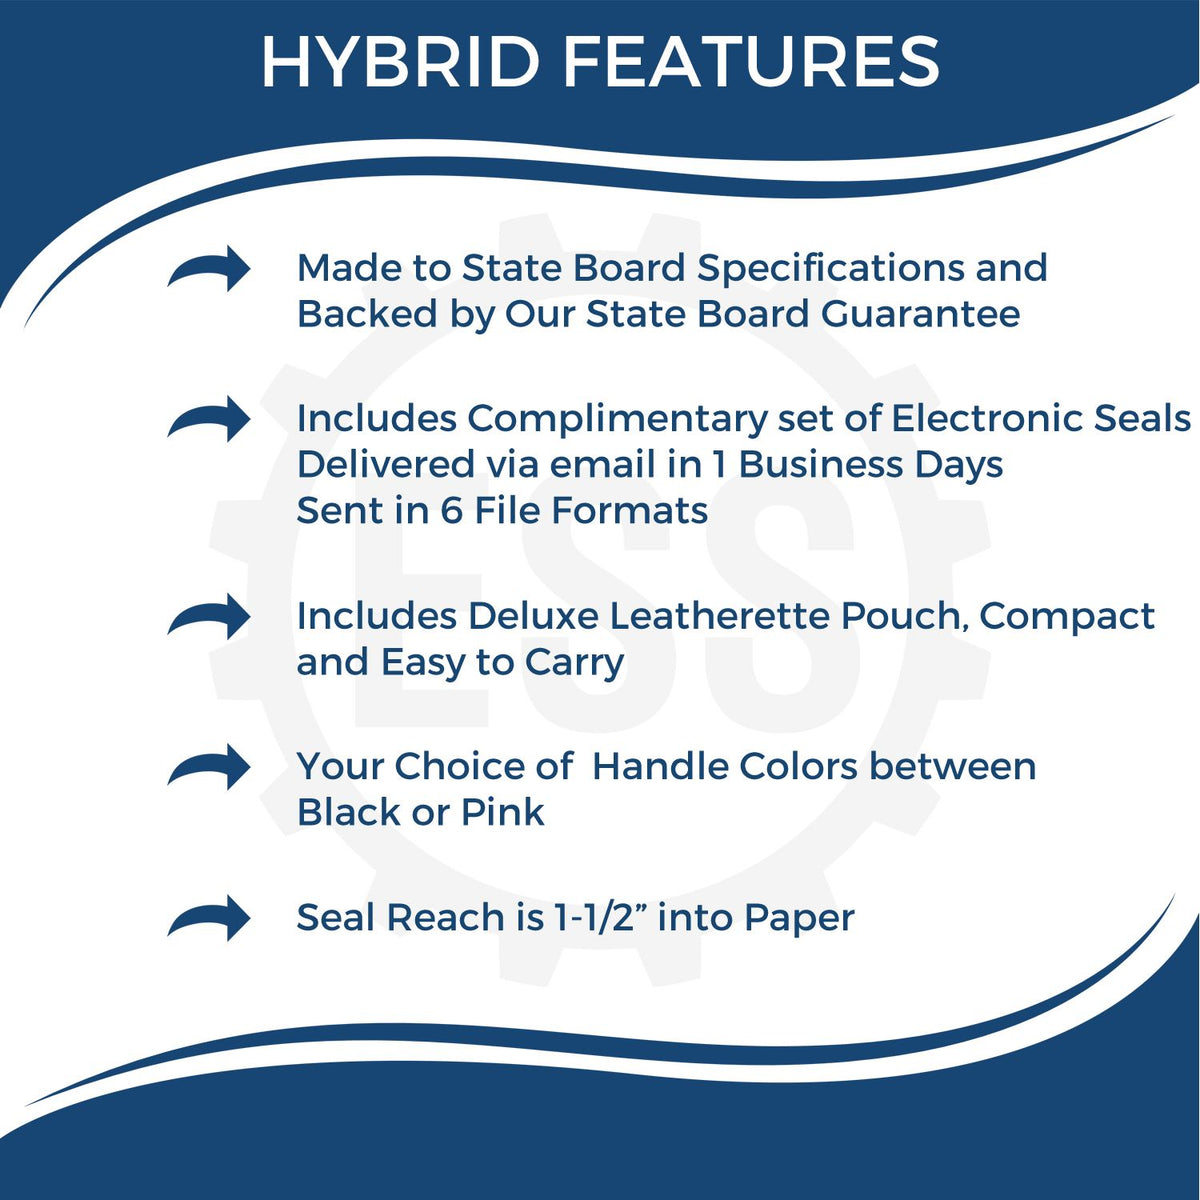 A picture of an infographic highlighting the selling points for the Hybrid Arizona Engineer Seal